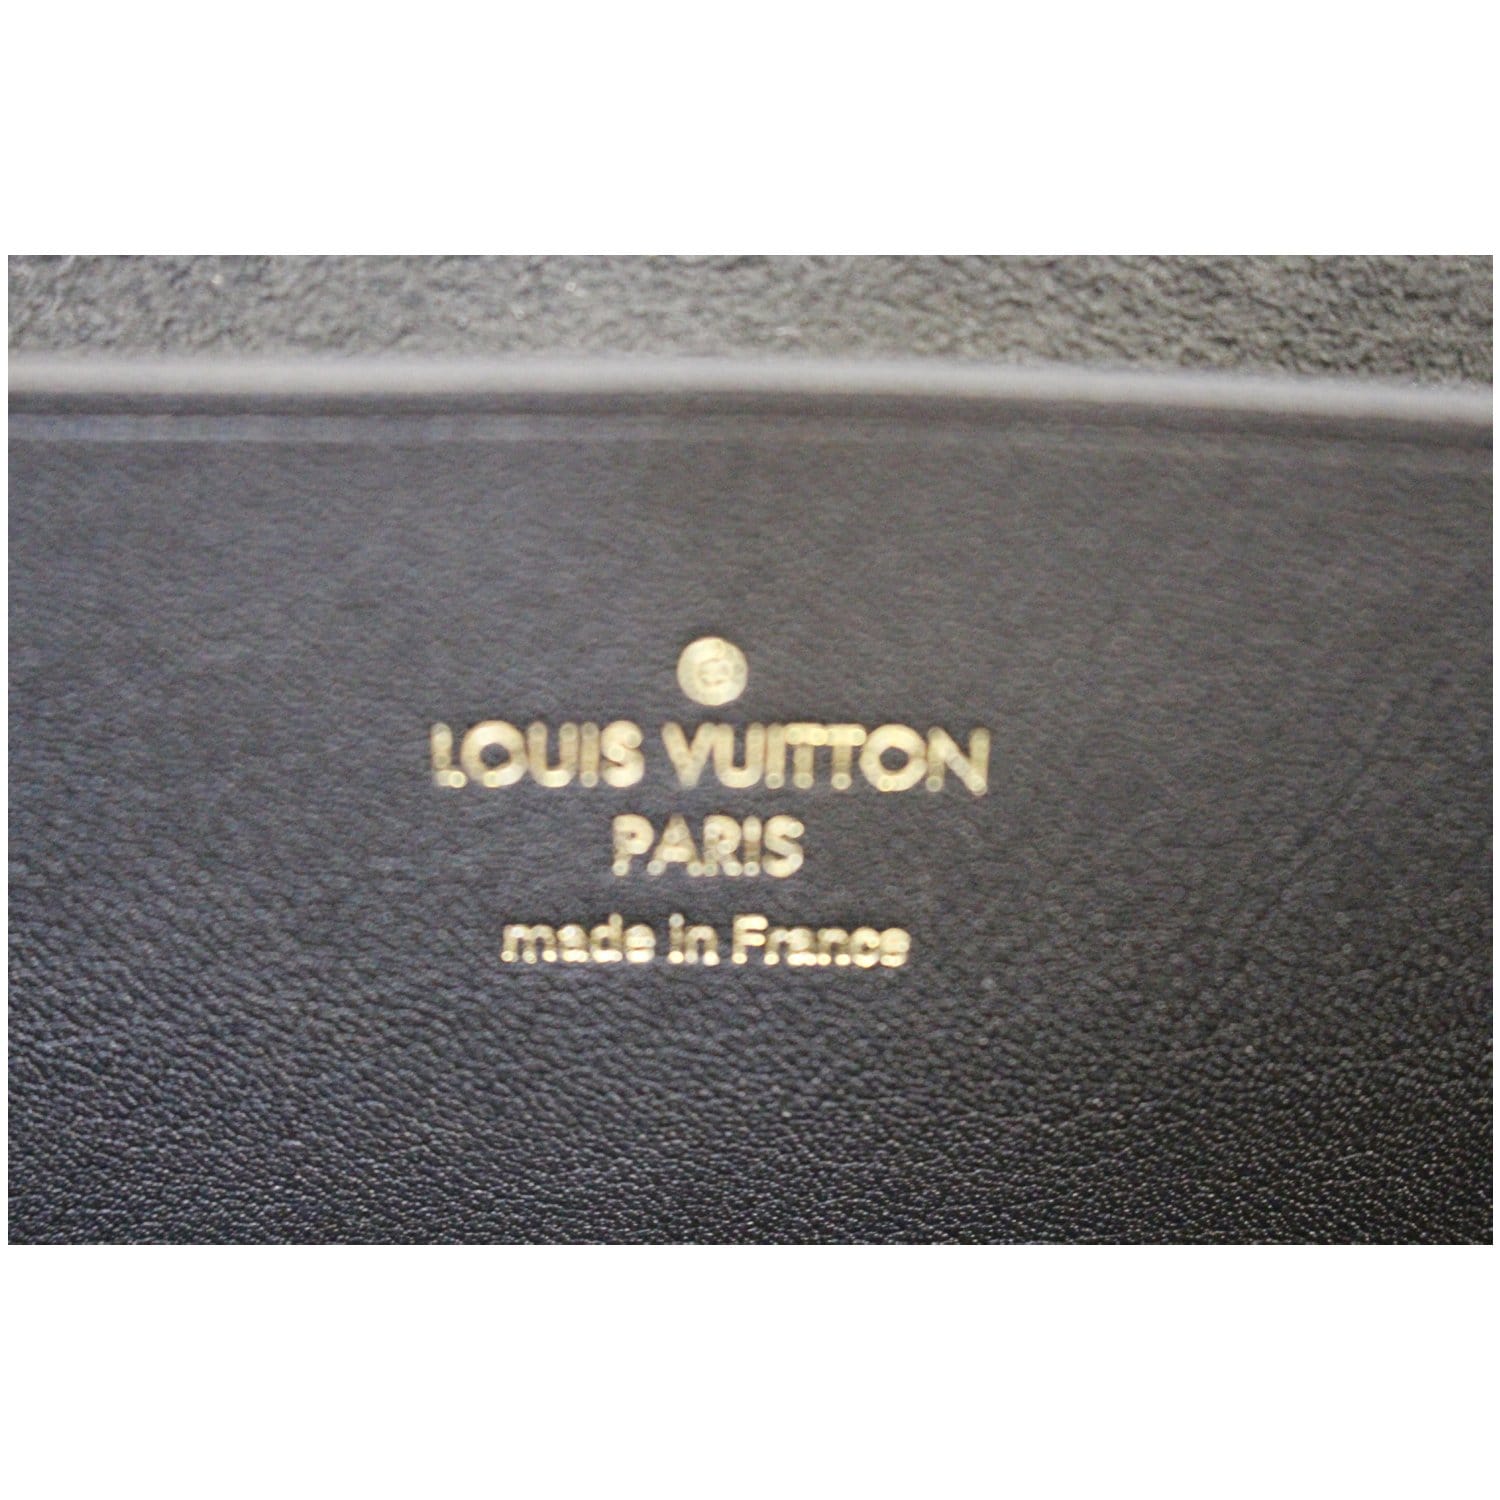 Louis Vuitton Black Calfskin Love Note Bag Gold Hardware, 2017 Available  For Immediate Sale At Sotheby's